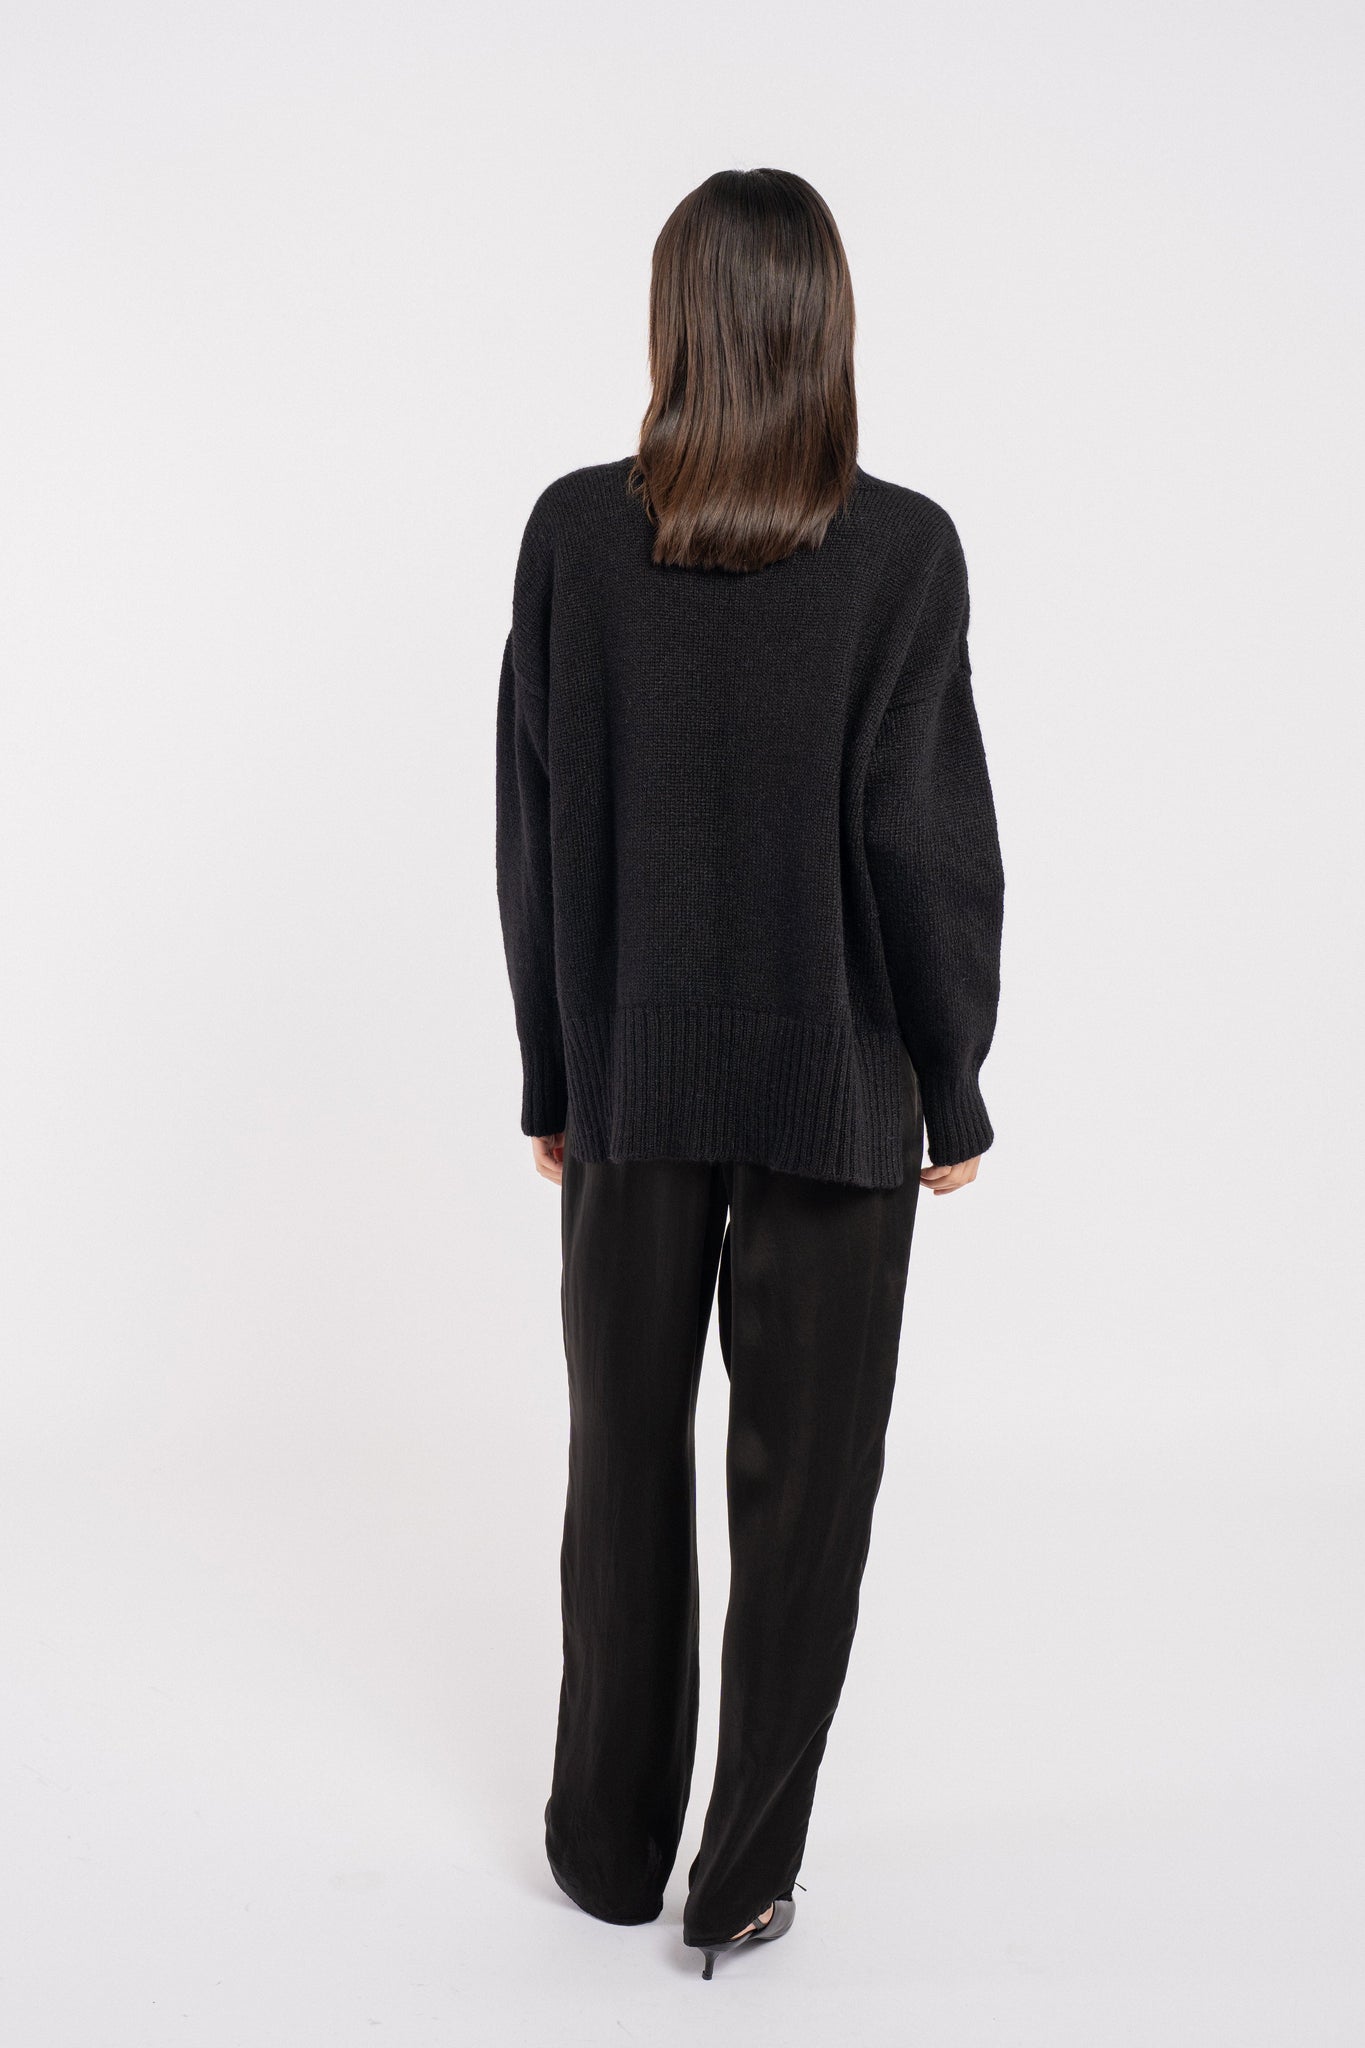 The back view of a woman wearing a Totto Sweater - Black - pre-order with ribbed trims.